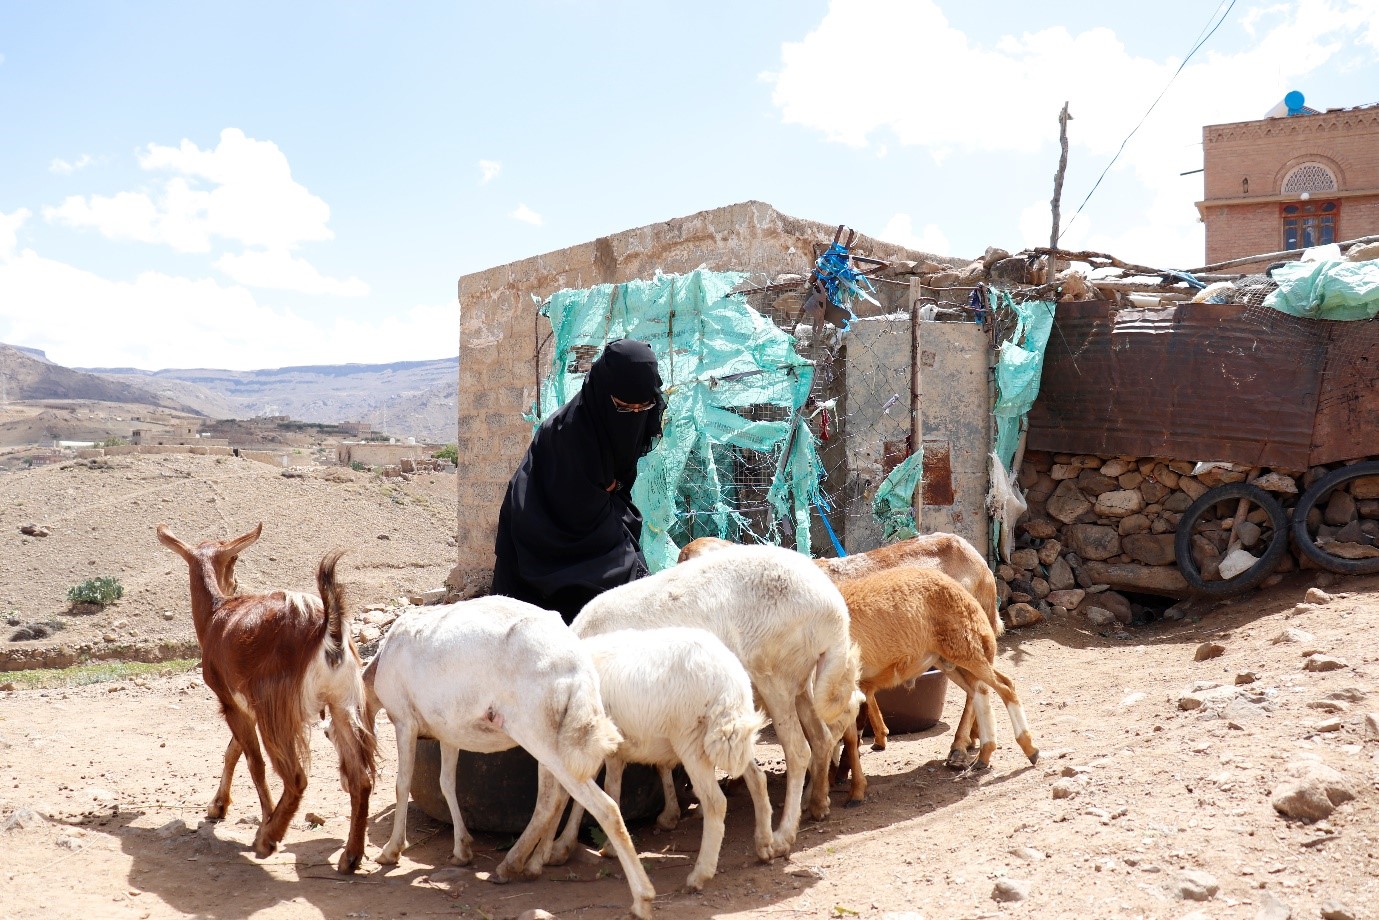 A woman standing in a field surrounded by goats